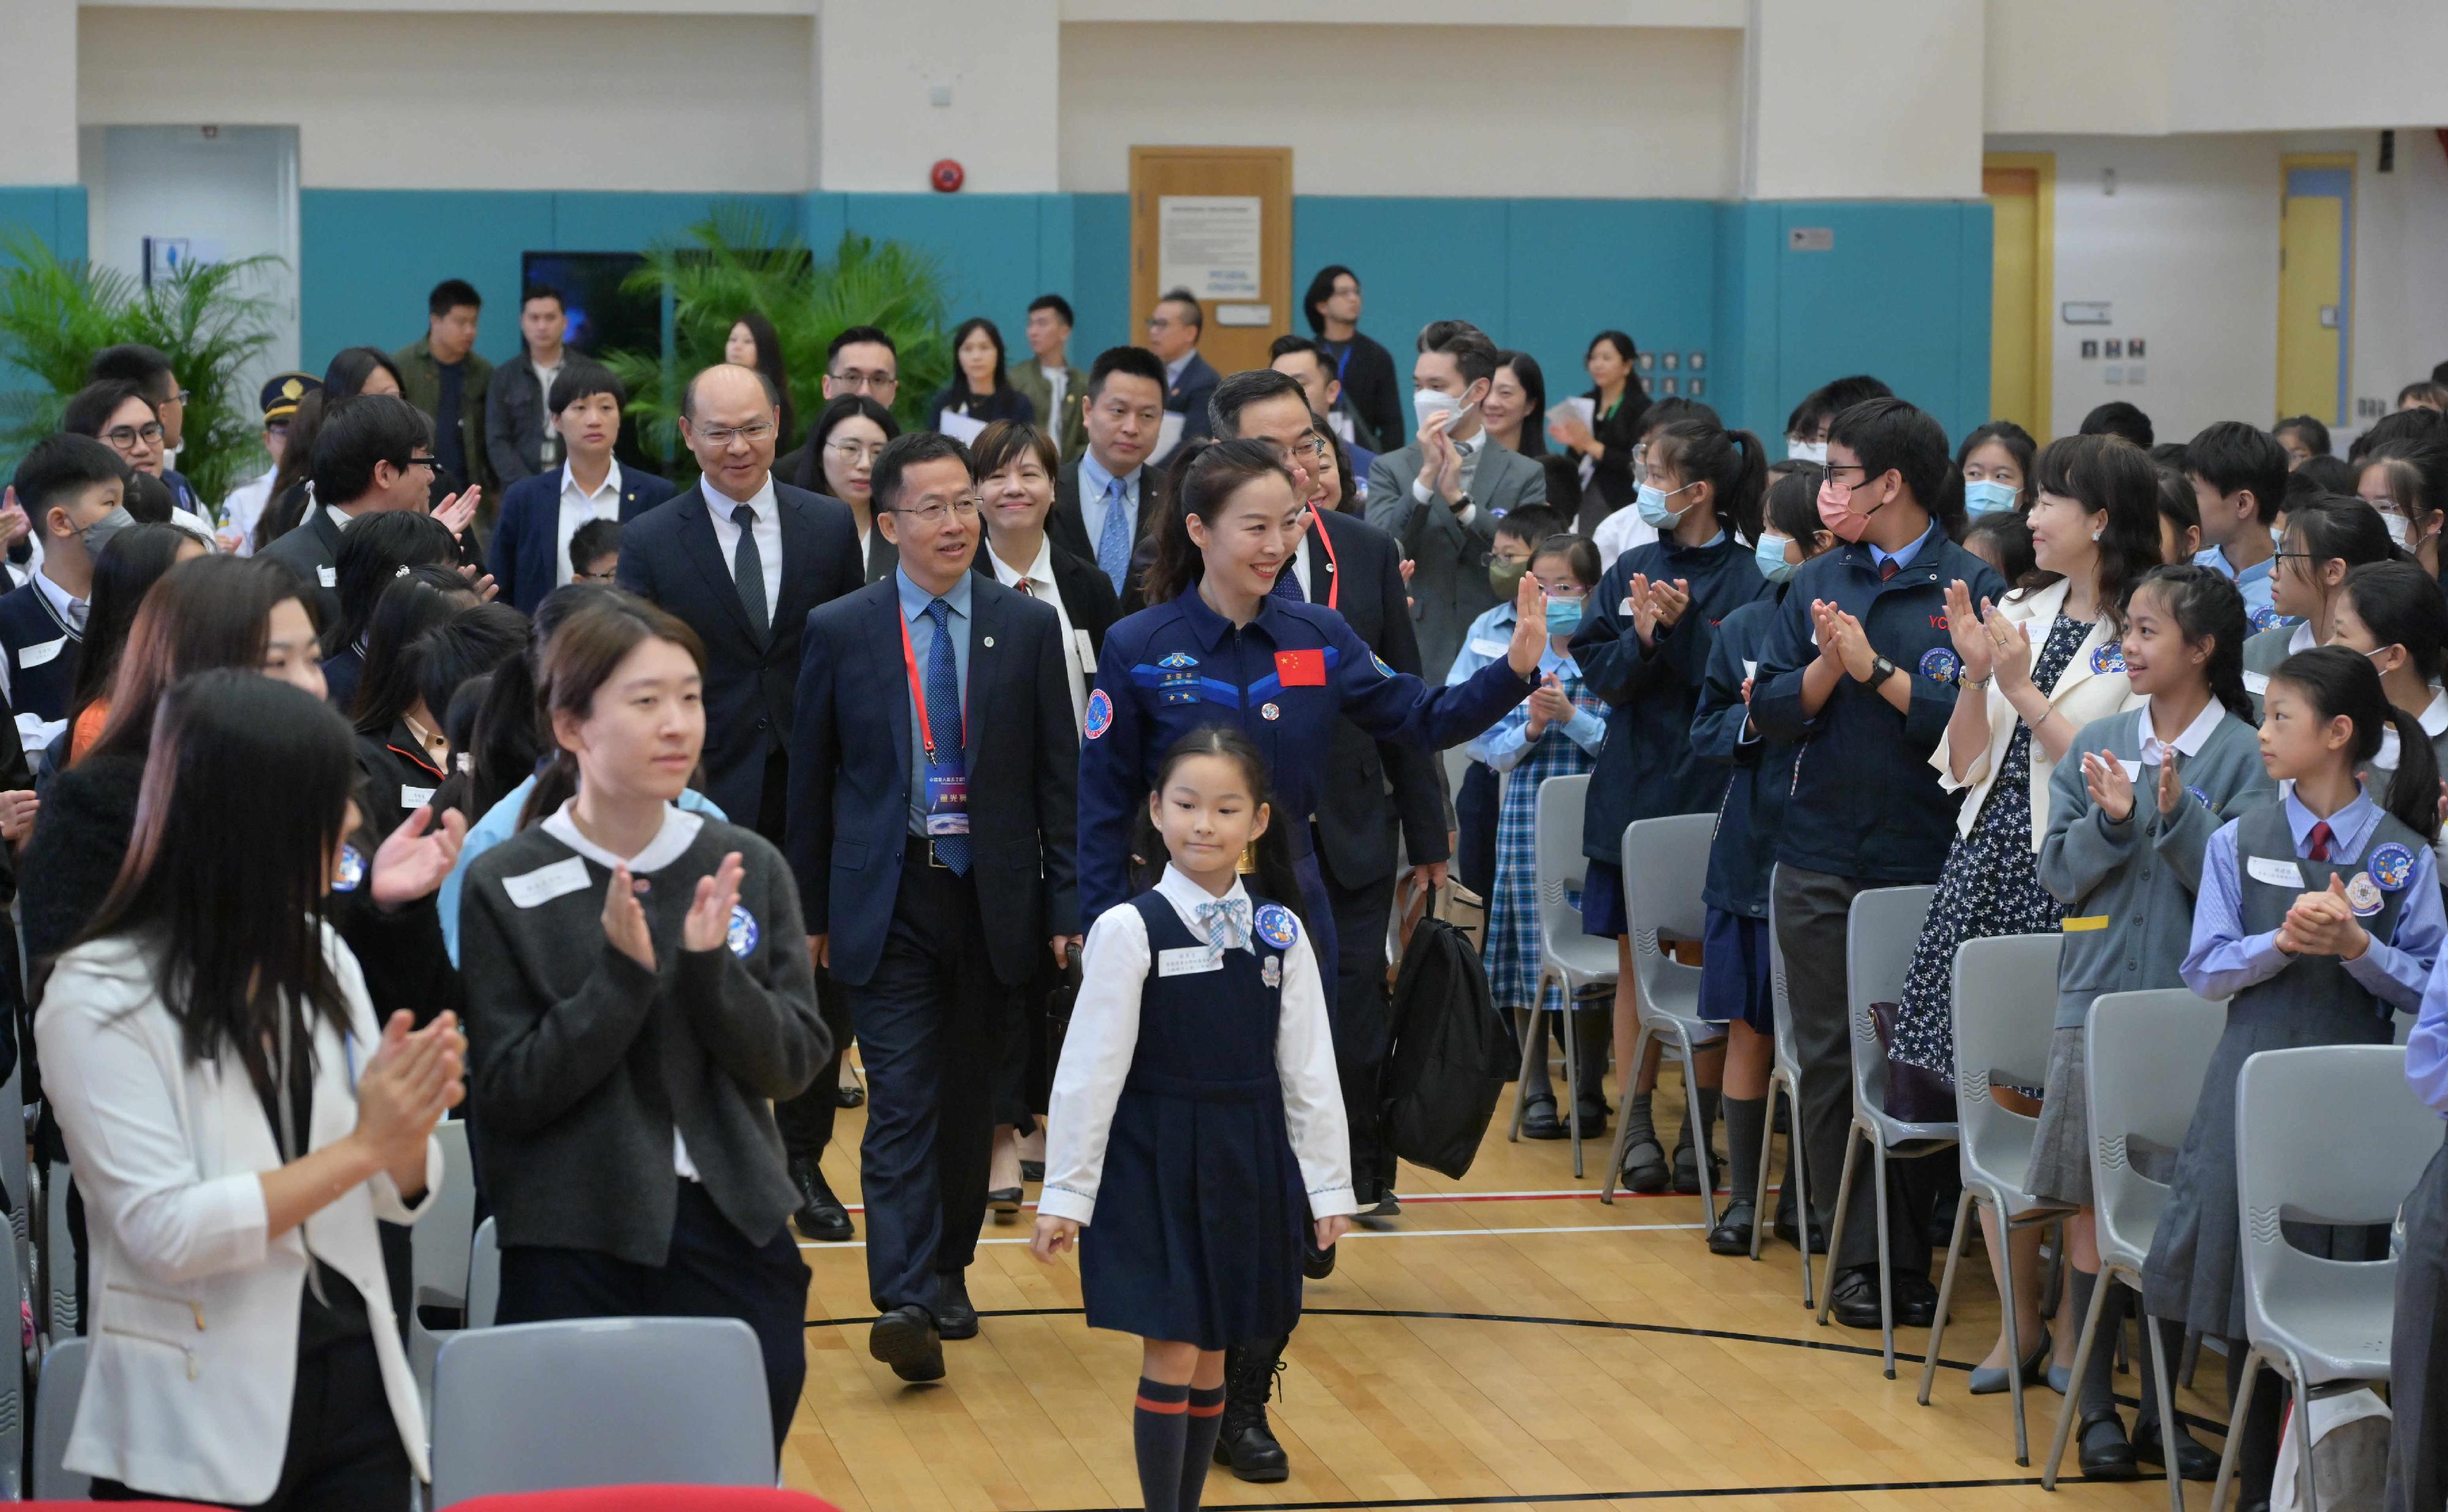 The China Manned Space delegation continued their visit in Hong Kong today (November 29). Photo shows Shenzhou-13 astronaut Ms Wang Yaping (second row, first right) together with the delegation members, attending a dialogue session with students at Hong Kong Baptist University Affiliated School Wong Kam Fai Secondary and Primary School (Primary Division).





